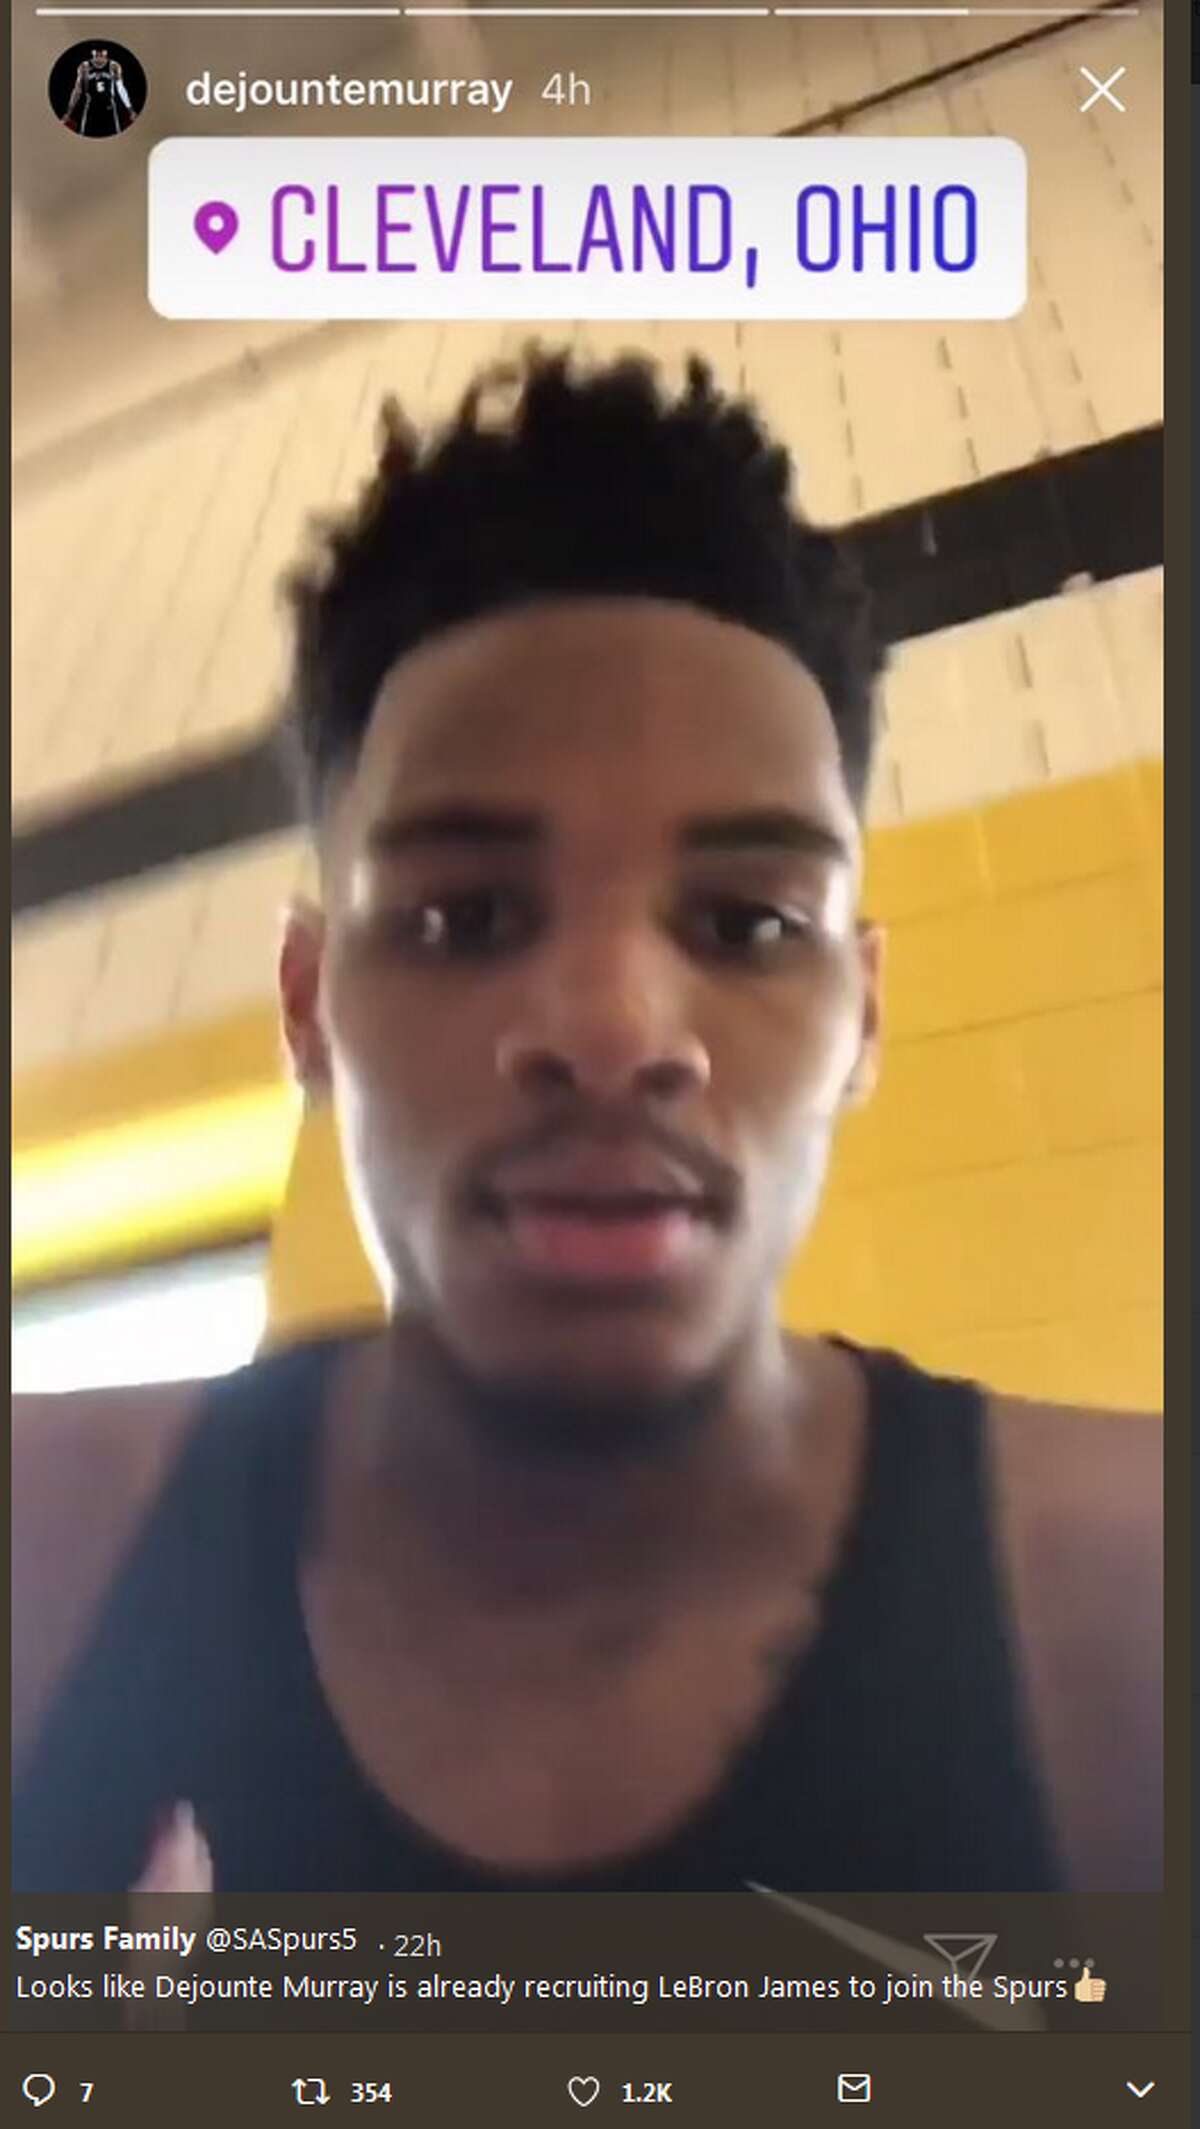 @SASpurs5: Looks like Dejounte Murray is already recruiting LeBron James to join the Spurs